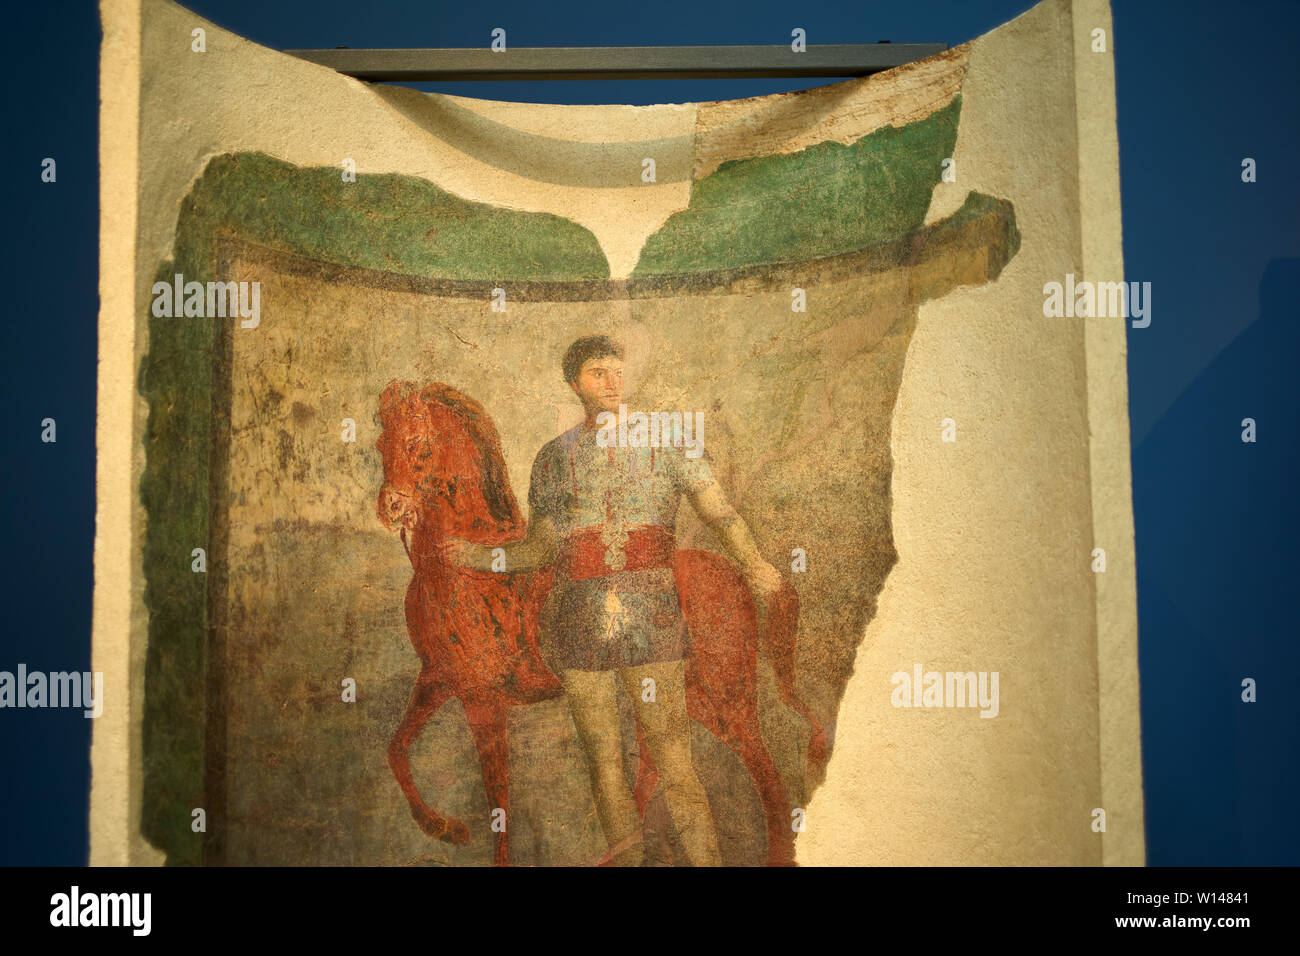 Ancient Roman artwork on display in the museum at Ostia Antica in Italy Stock Photo